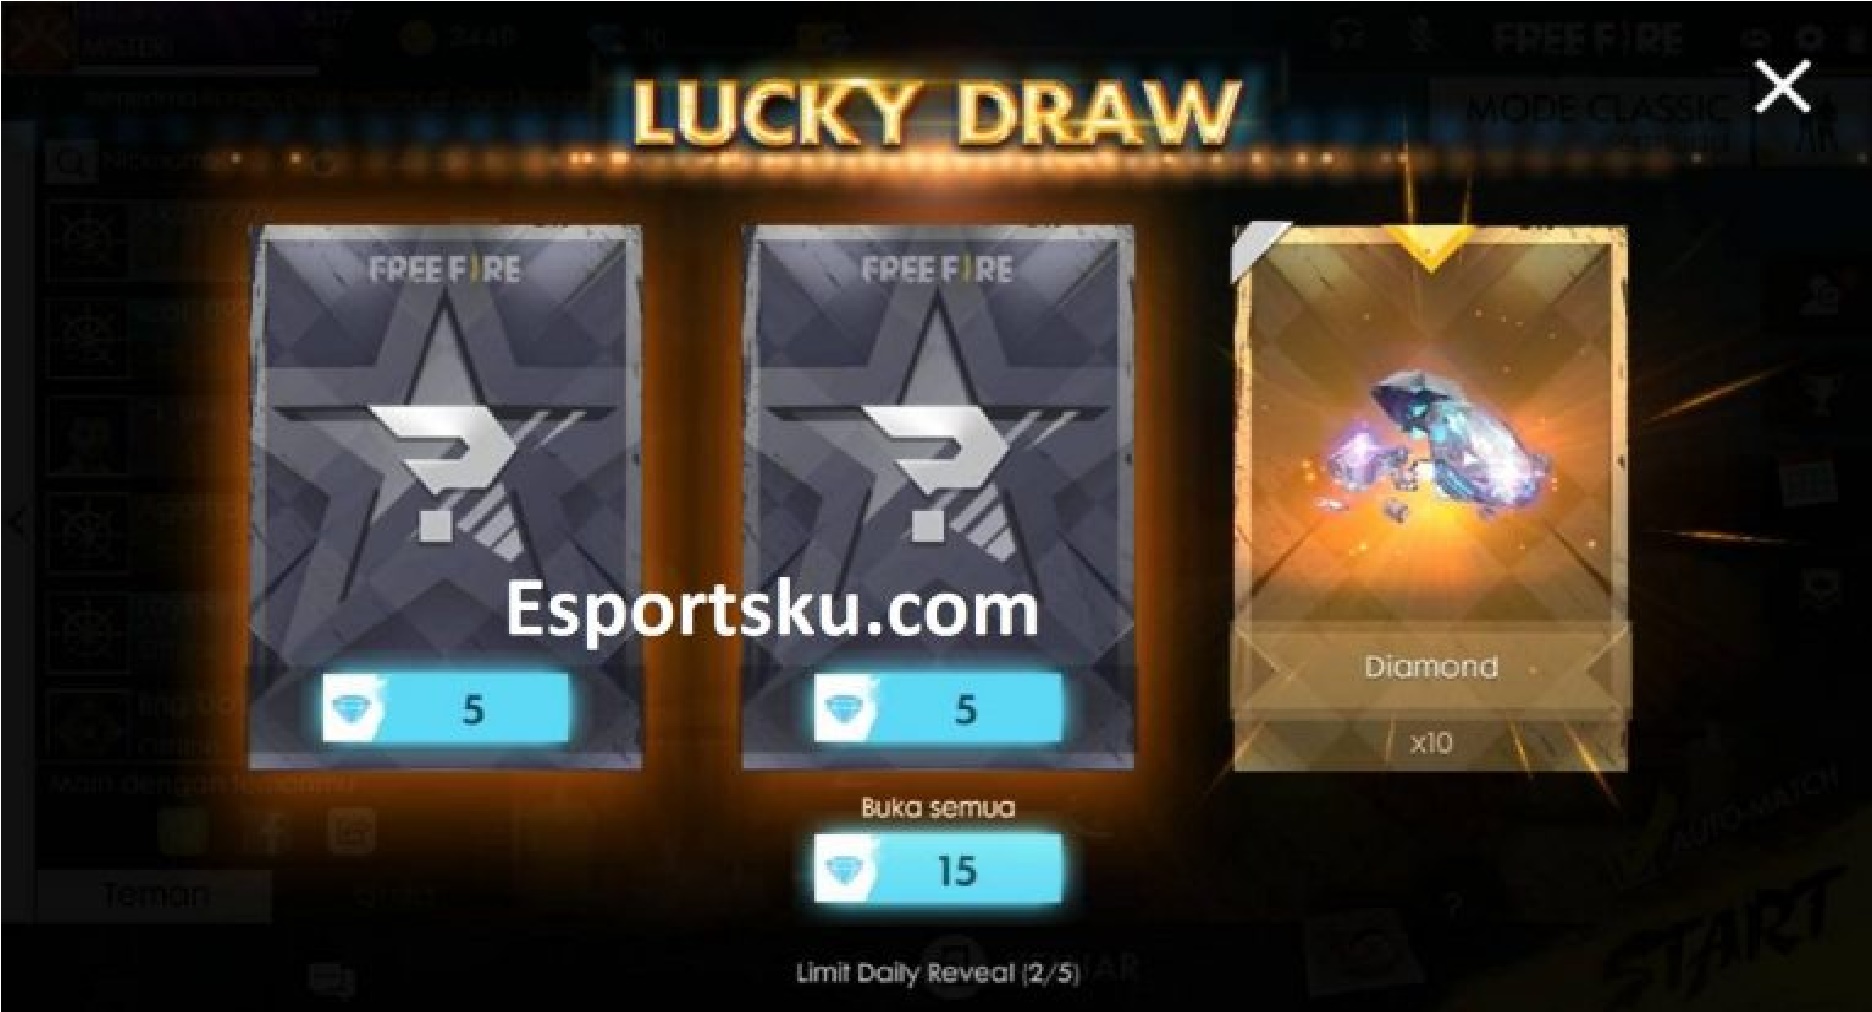 Butterfly lucky draw event карта. Lucky draw mobile game. Lucky draw Box ПАБГ код.